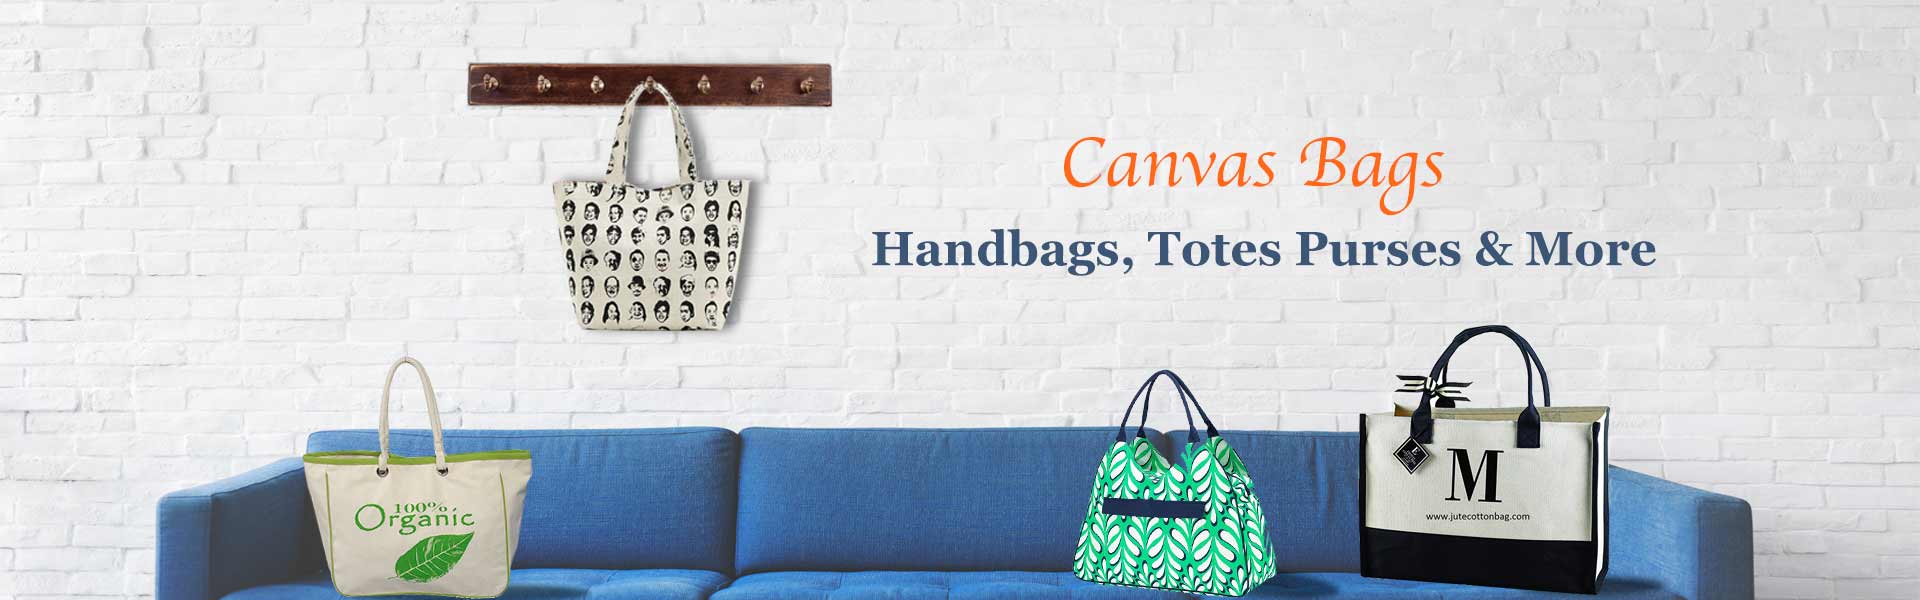 Wholesale Canvas Bags Supplier in Netherlands